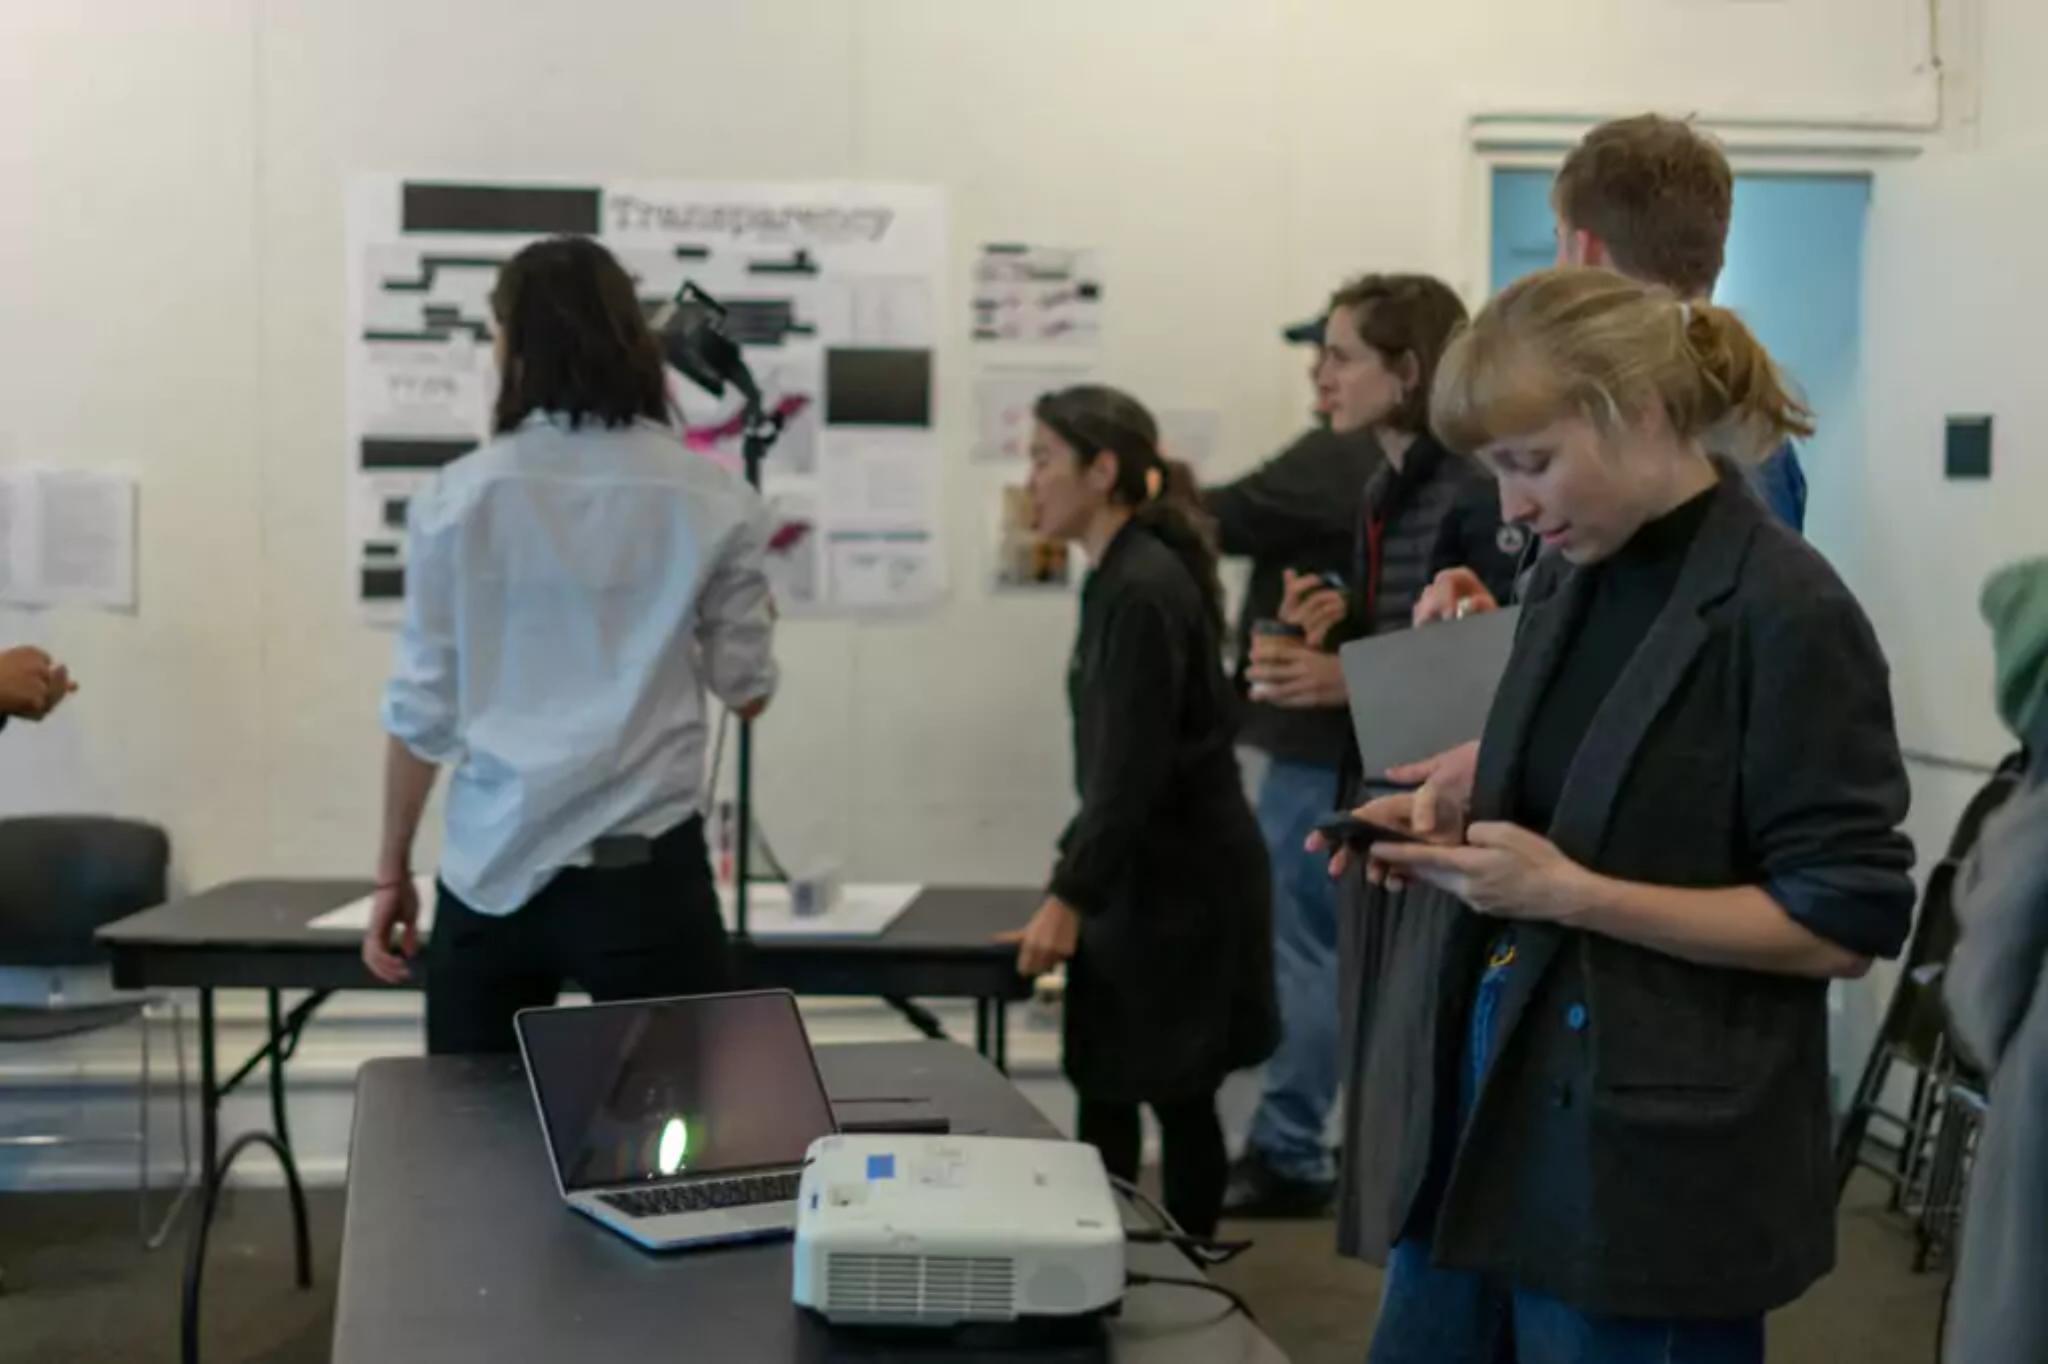 End of the year exhibition for Urban Datascapes taught by Prof. Leah Meisterlin